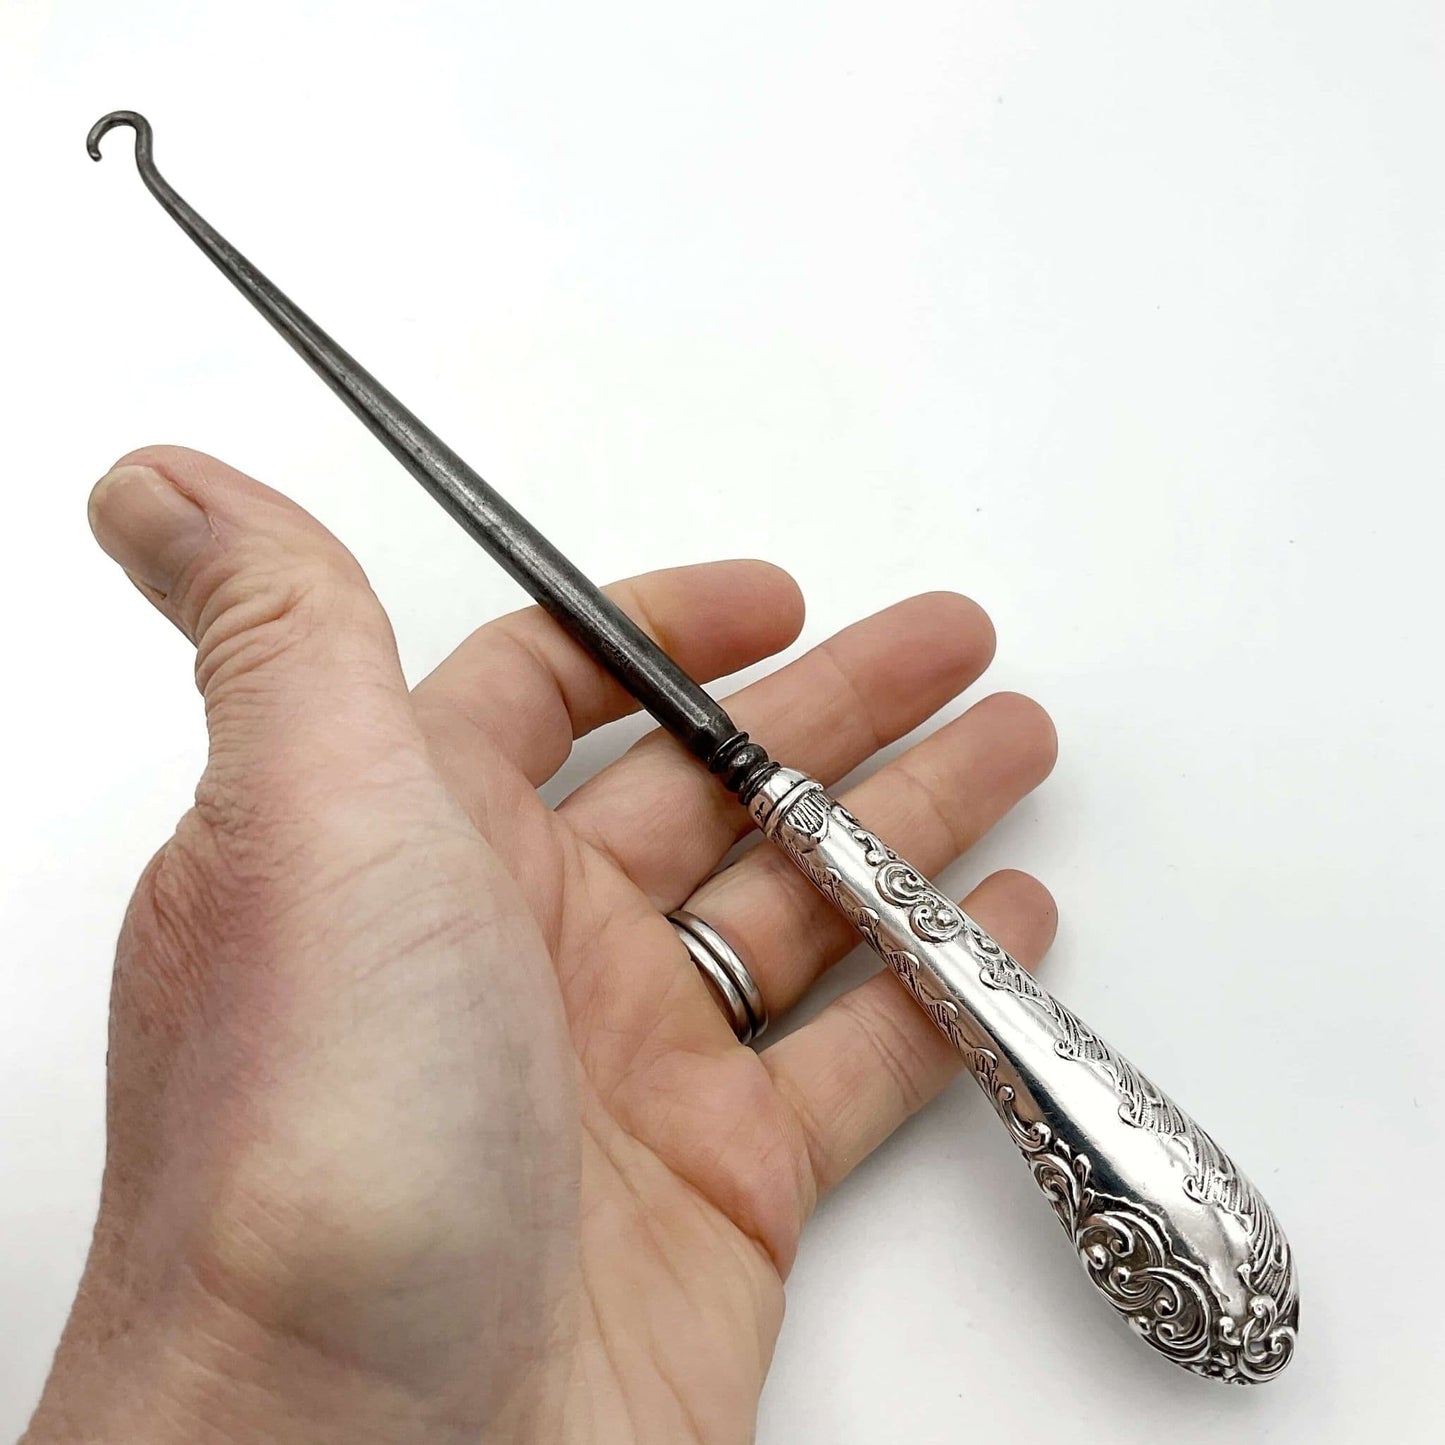 silver handled antique button hook being held in a hand